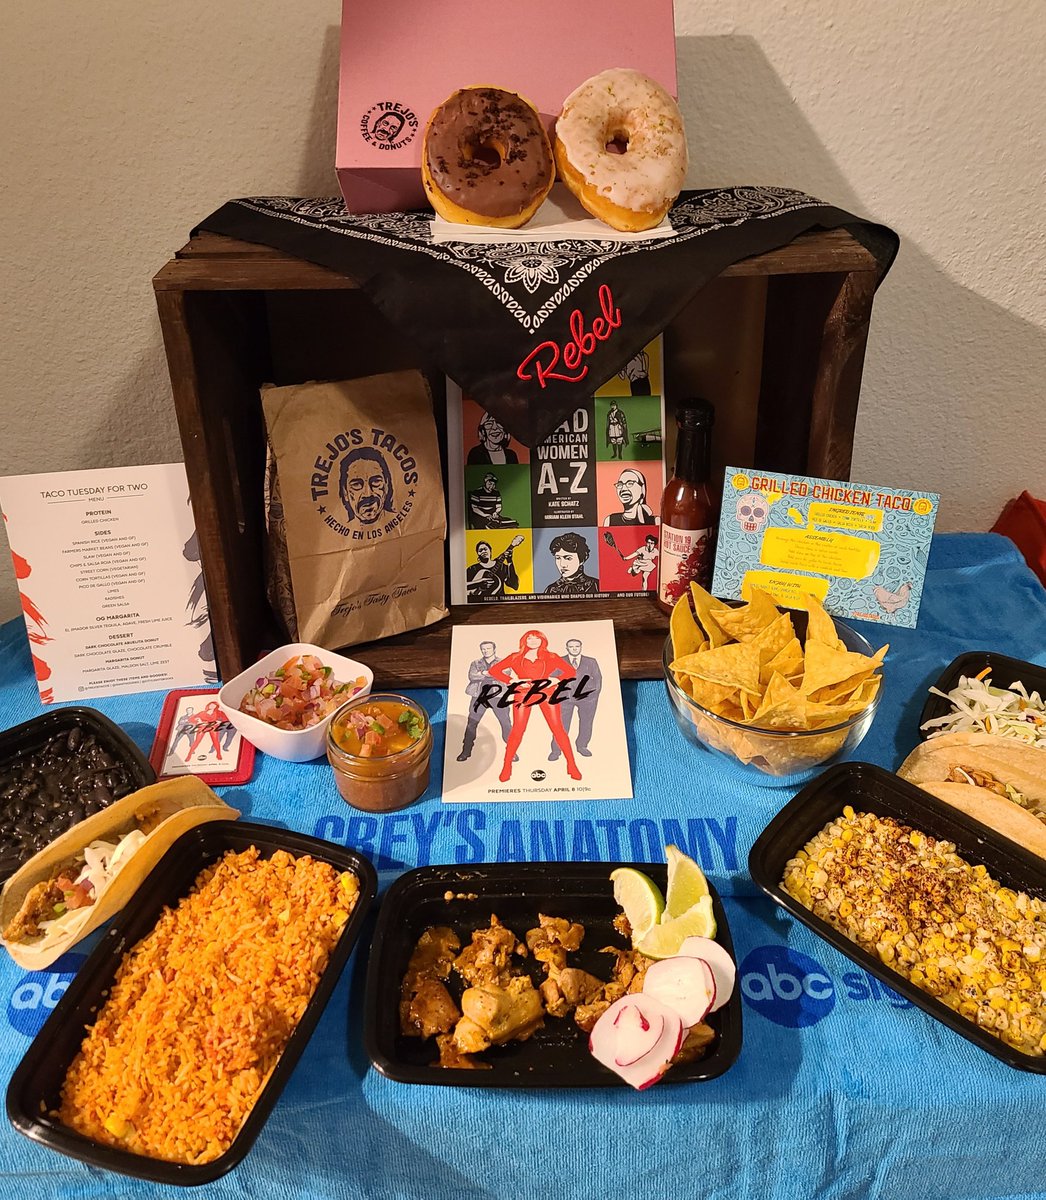 Enjoyed this care package last night while viewing the @rebelabc sneak peek. Watch the premiere this Thursday night on ABC #rebelpremiereevent #Trejosdonuts #Rebel